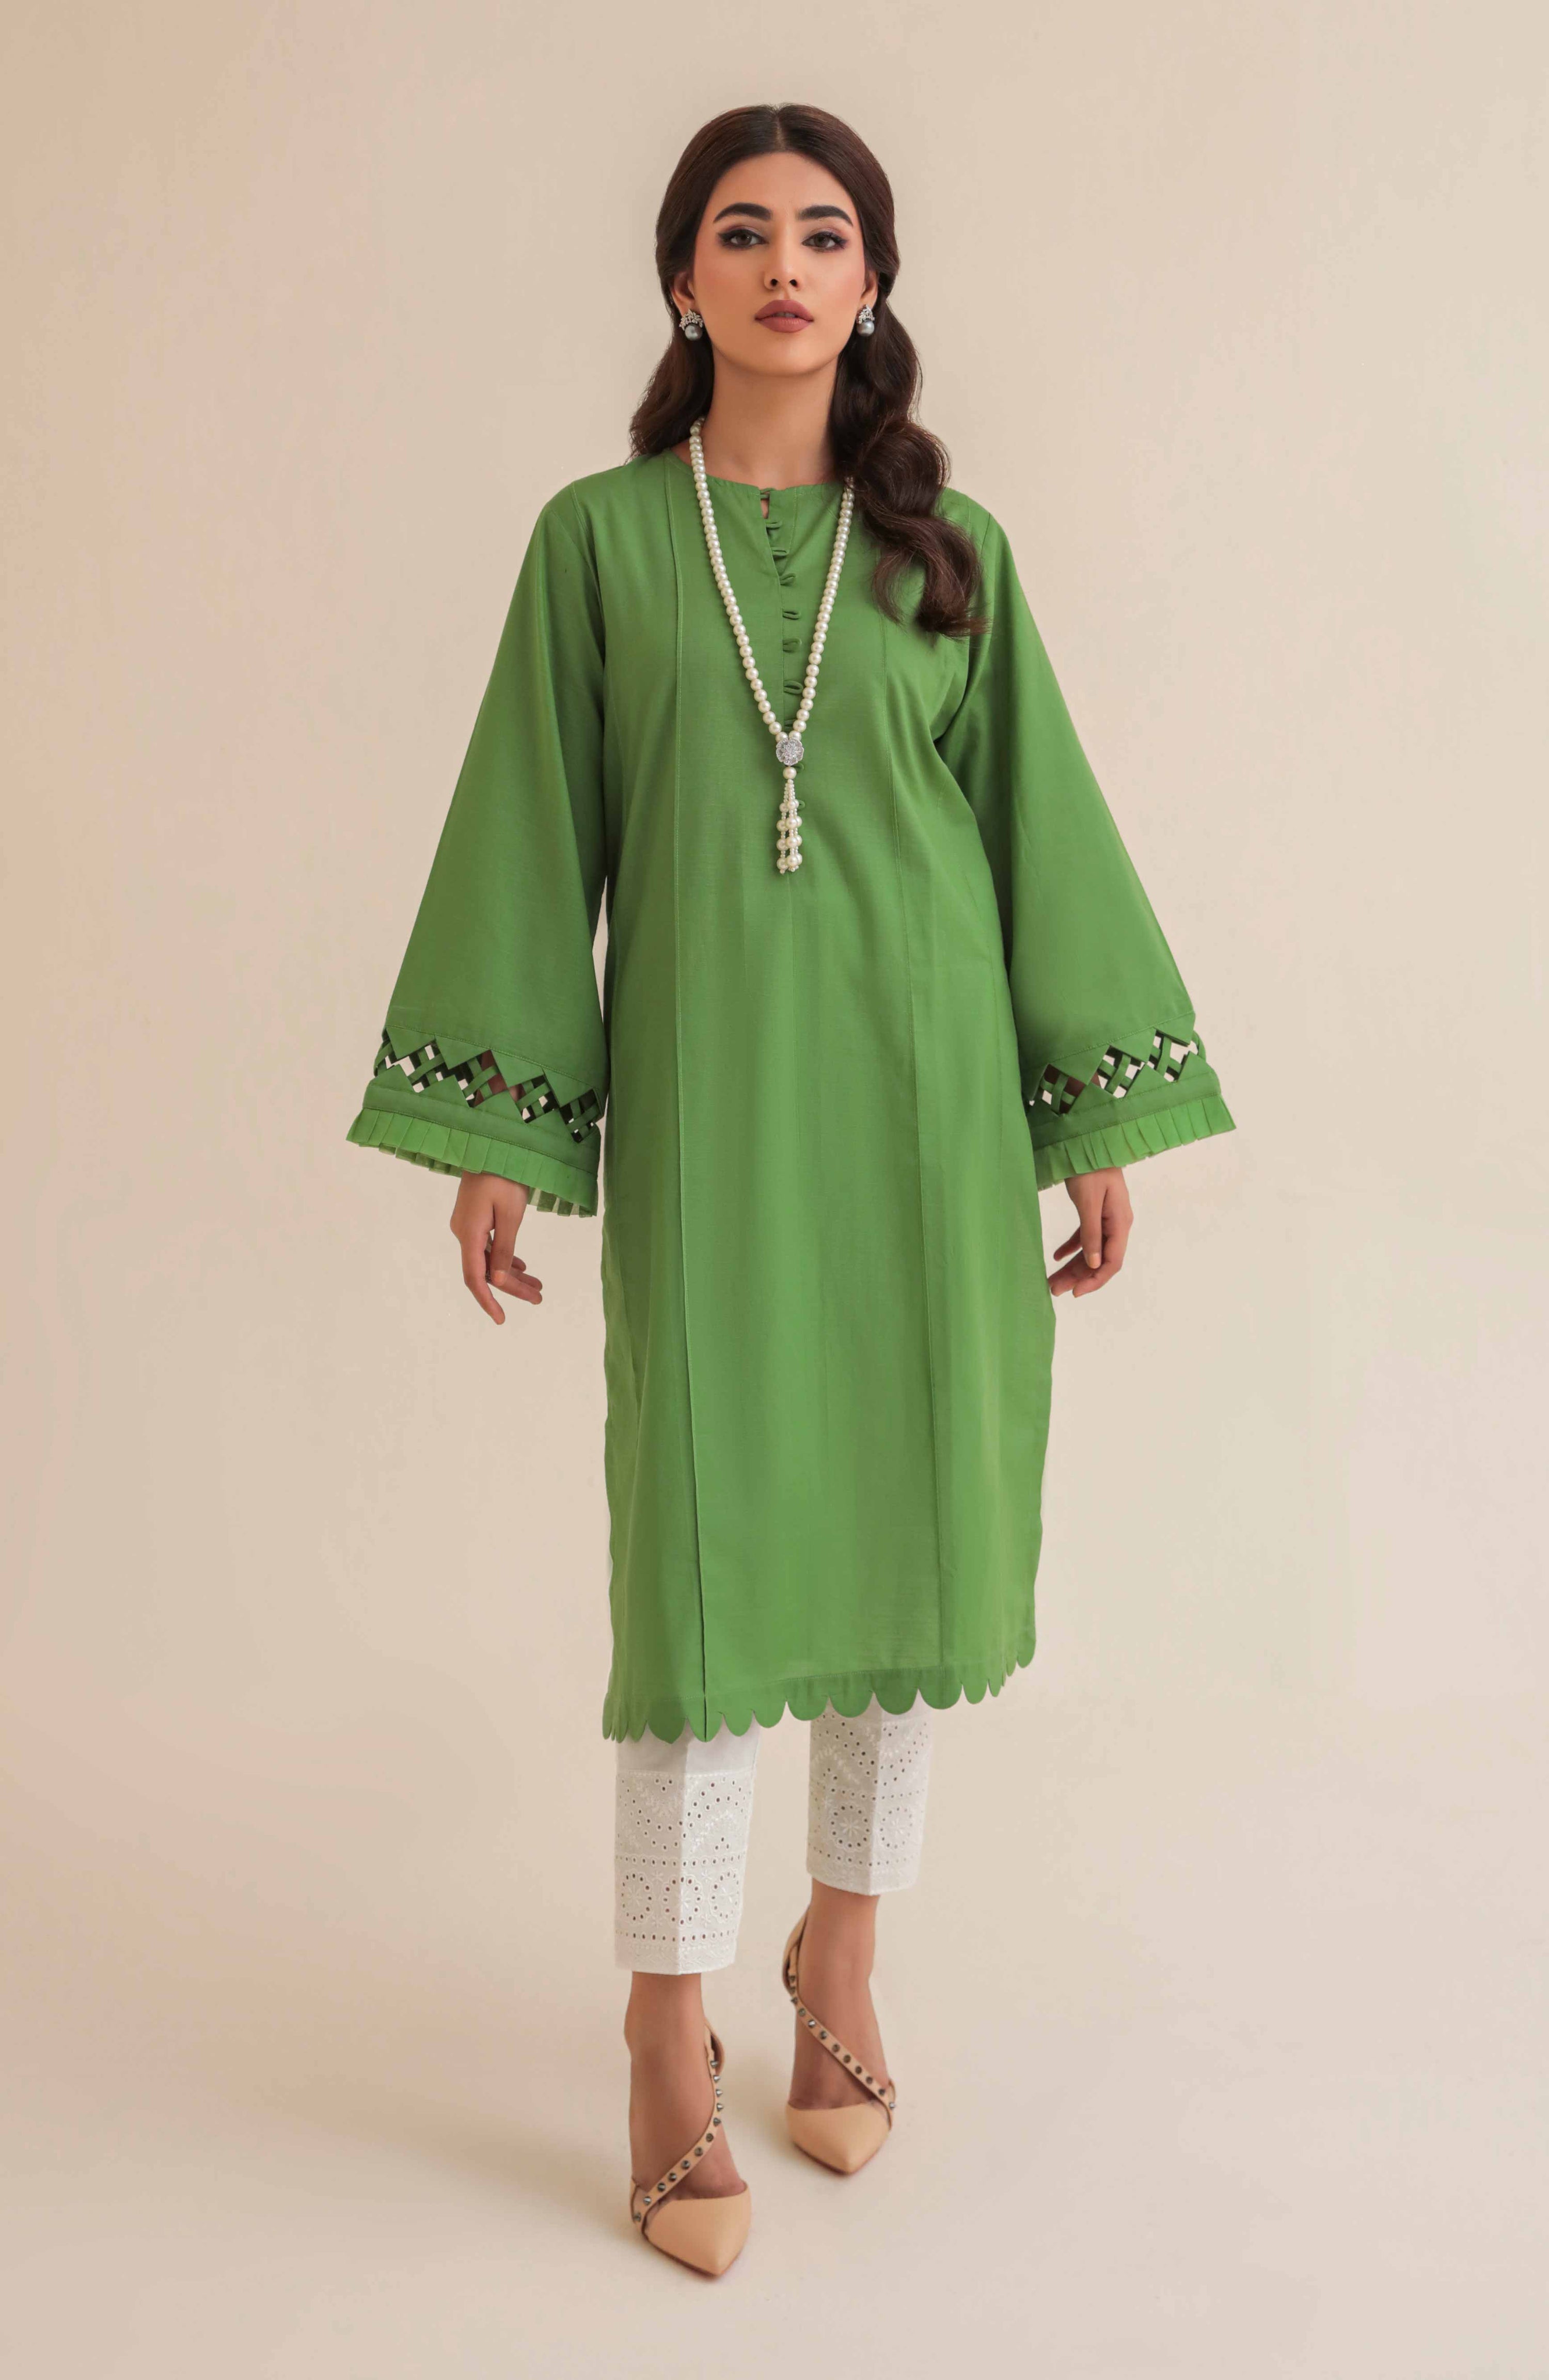 Textured Lawn Dress Designs For Girls In Green Color